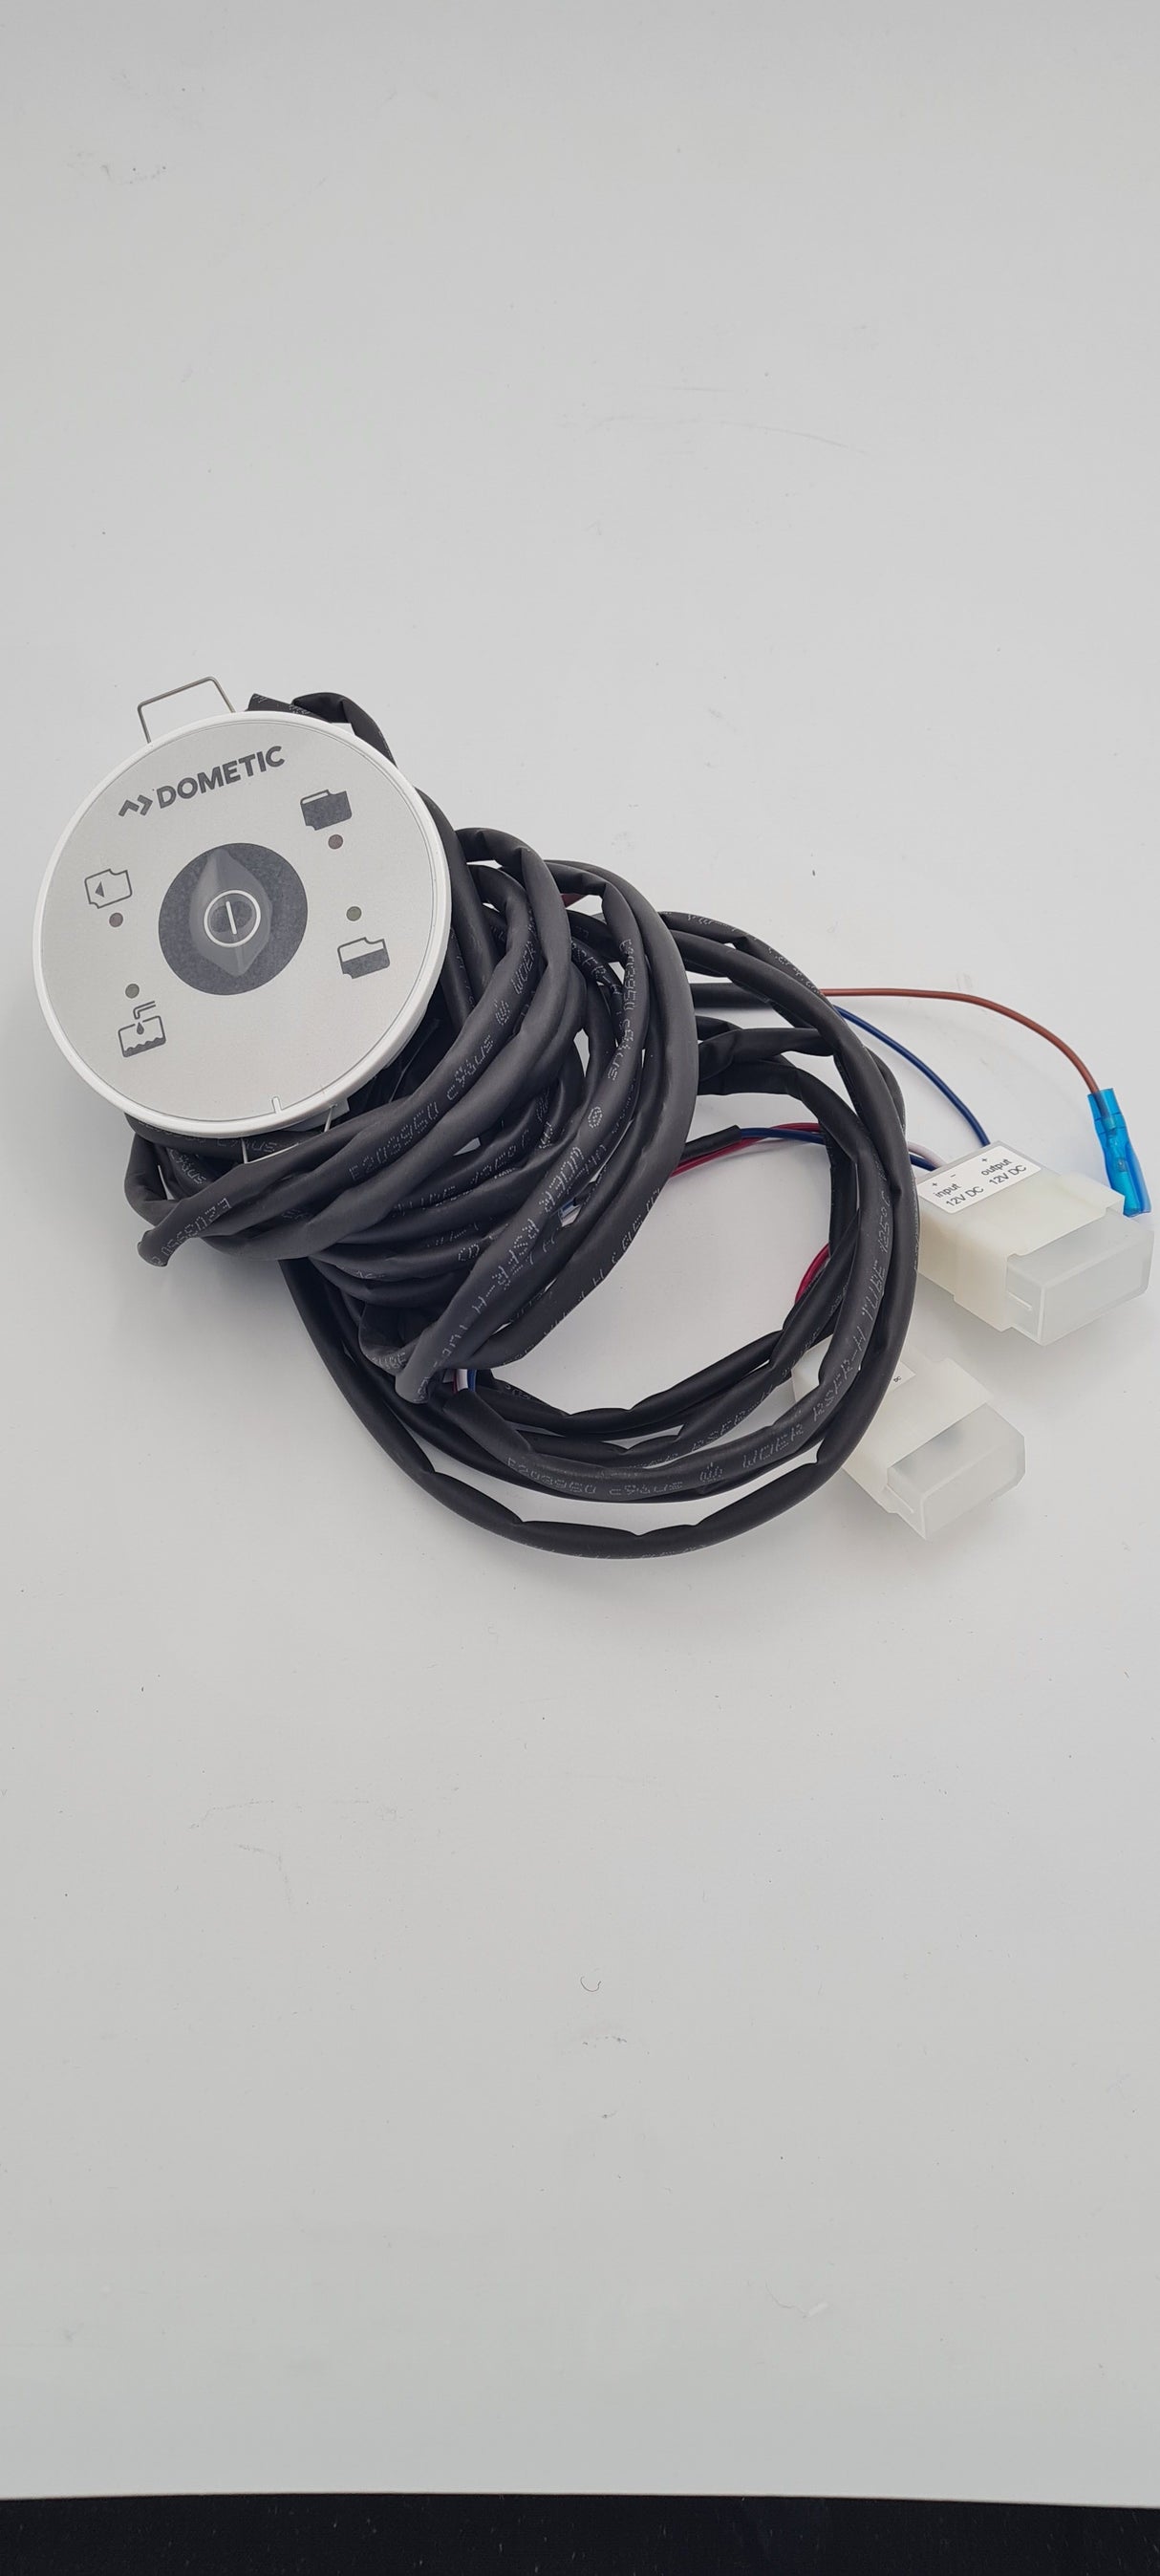 Dometic Toilet Control Switch - 4/6 POL Long Cable -4450017541